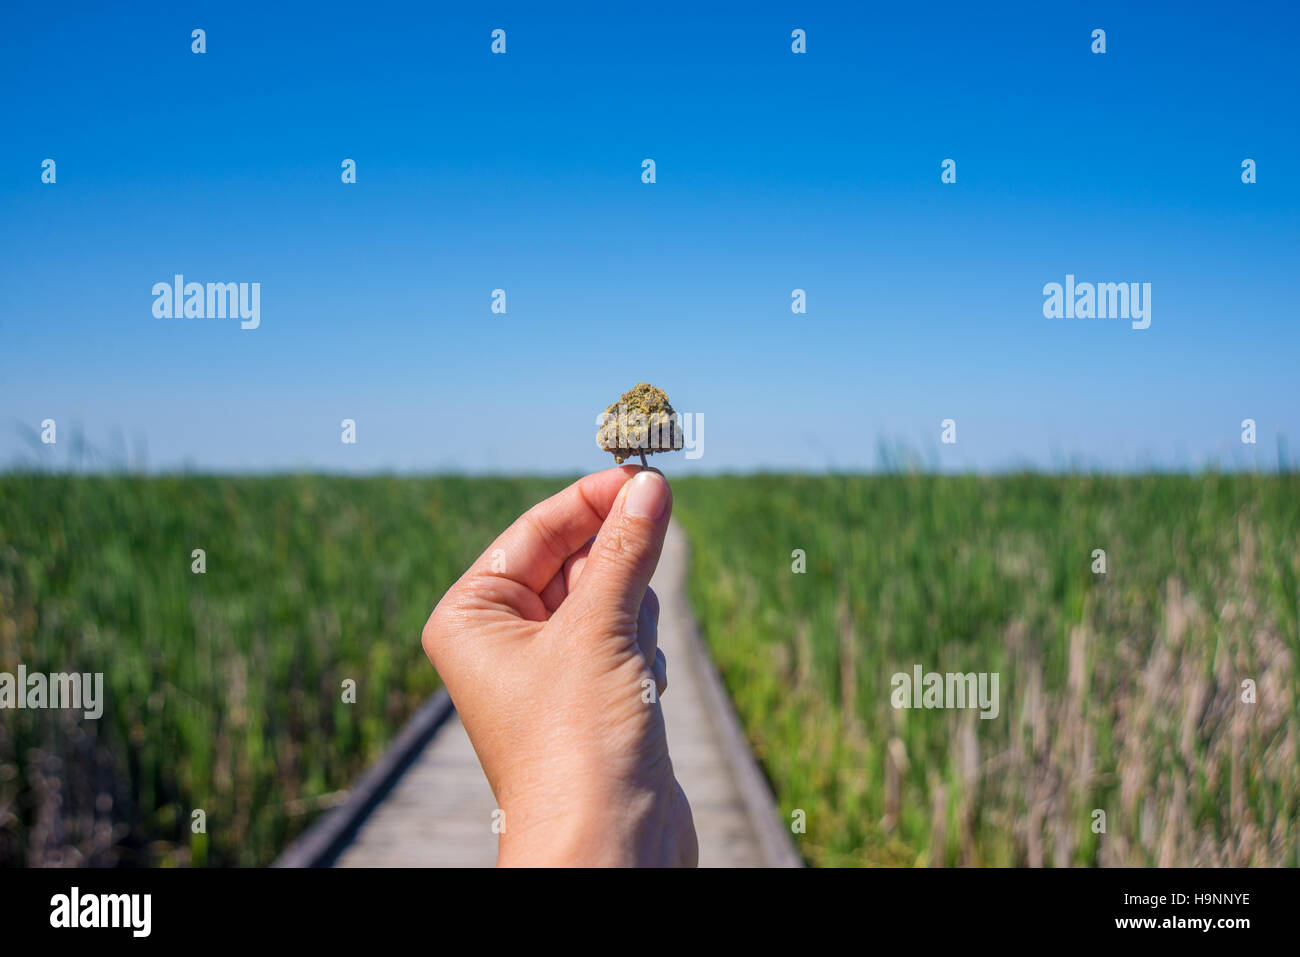 Hand holding cannabis bud against trail and blue sky landscape - medical marijuana concept Stock Photo